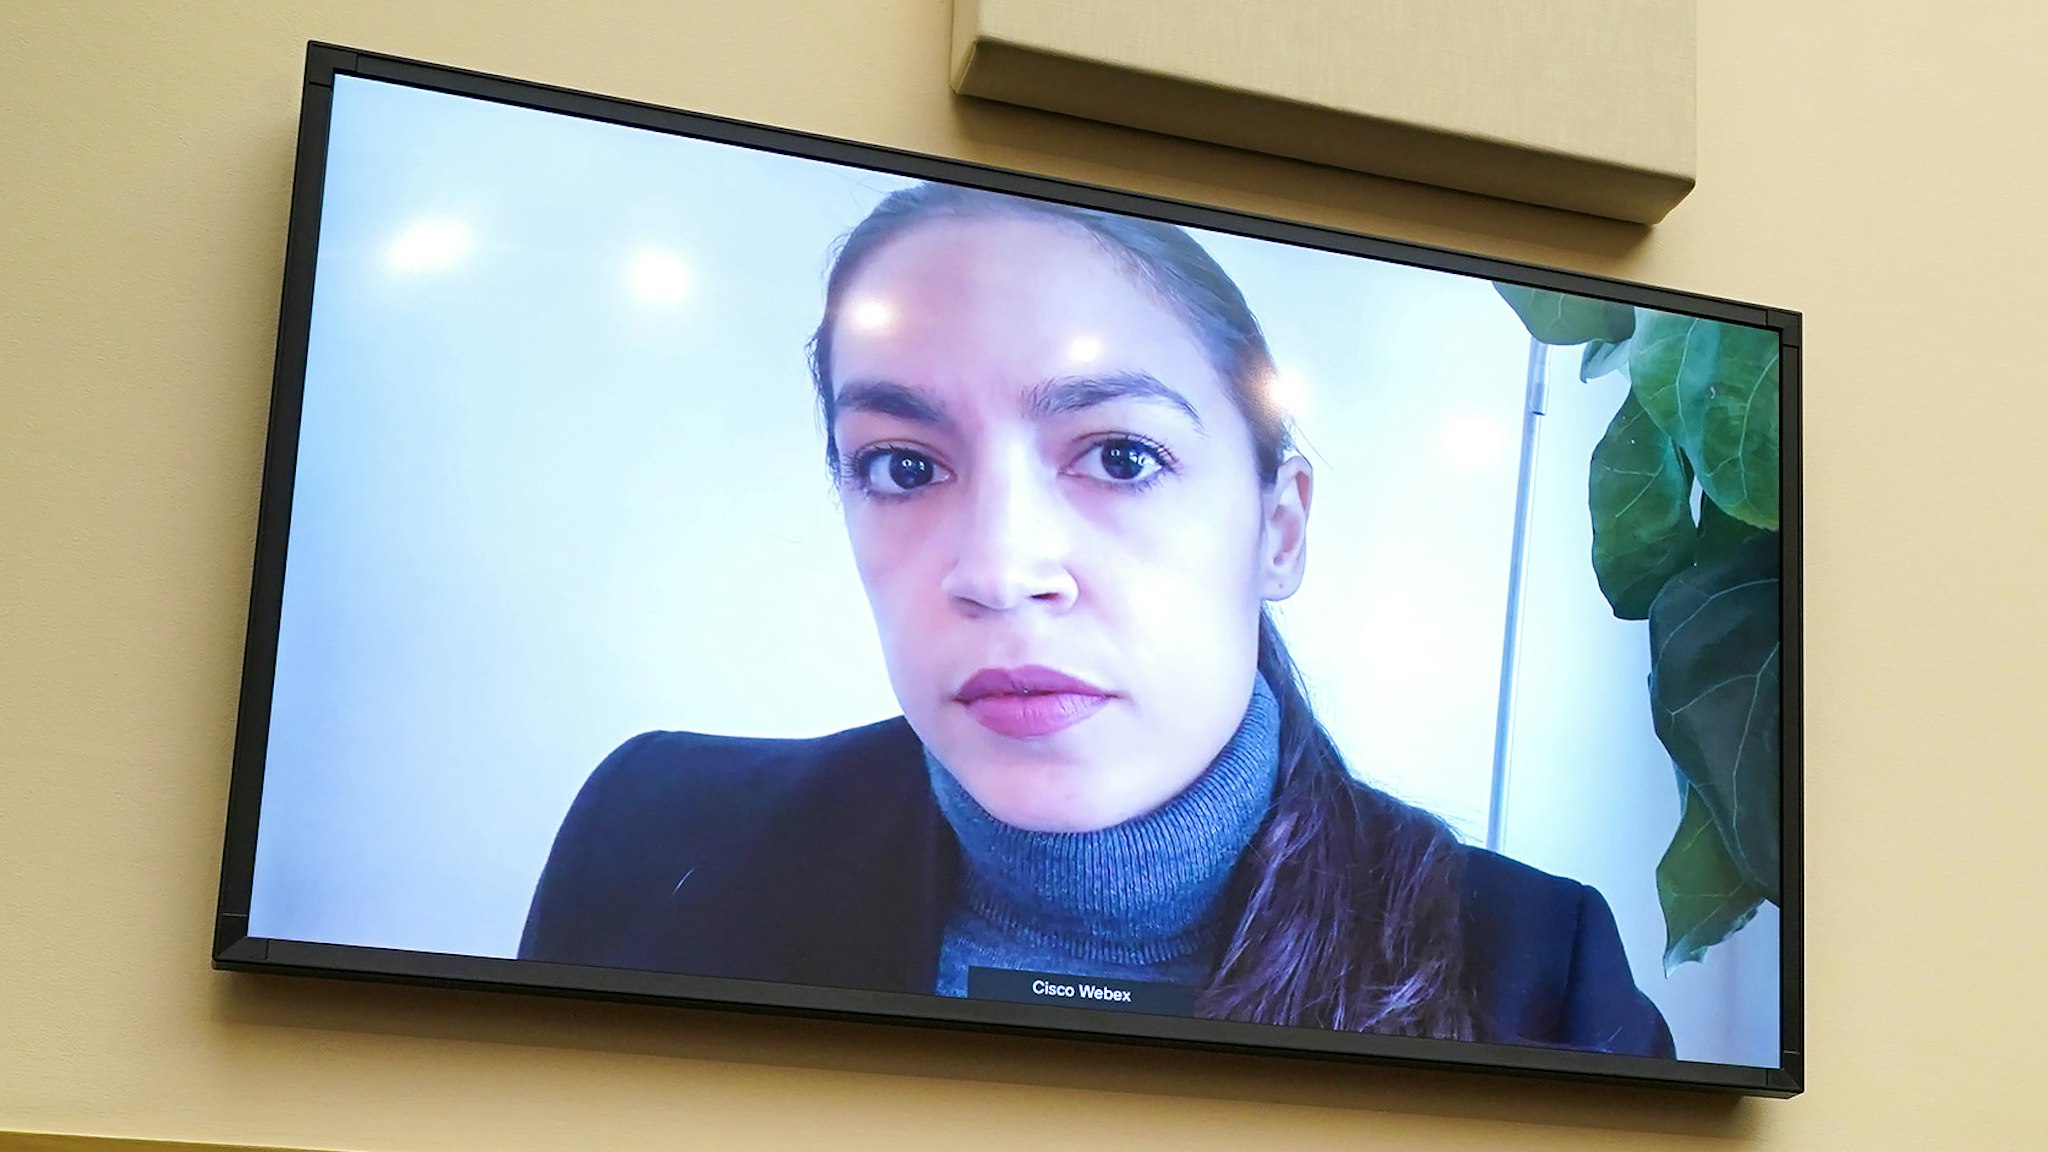 Representative Alexandria Ocasio-Cortez, a Democrat from New York, speaks via videoconference during a House Financial Services Committee hearing in Washington, D.C., U.S., on Wednesday, Dec. 2 2020. Powell and Mnuchin both backed more fiscal stimulus to bridge the U.S. economy through the next few months of the pandemic amid promise for Covid-19 vaccines.